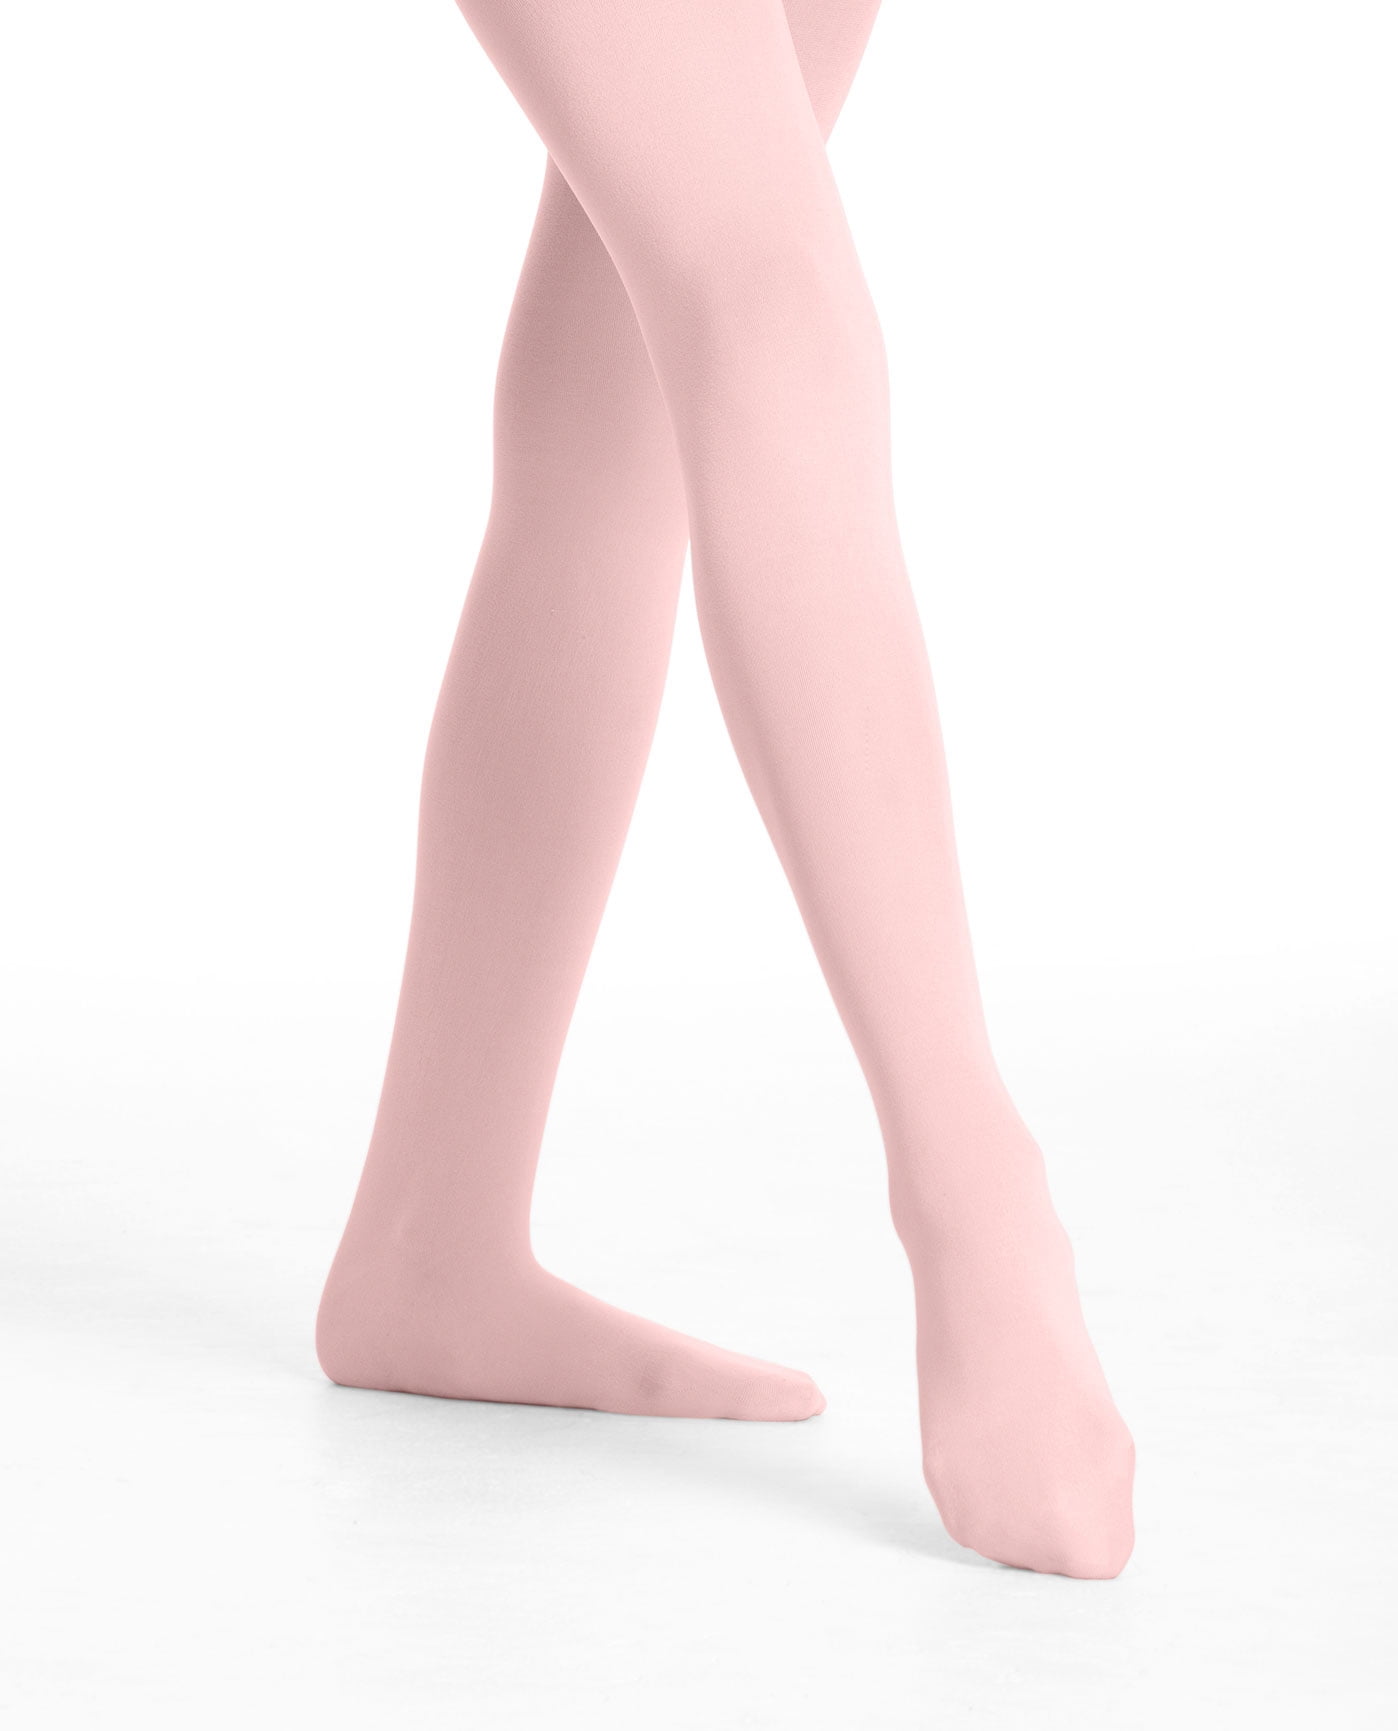 - Ballet Pink Child and Adult Sizes NEW-Convertible Dance Tights 2 pairs 